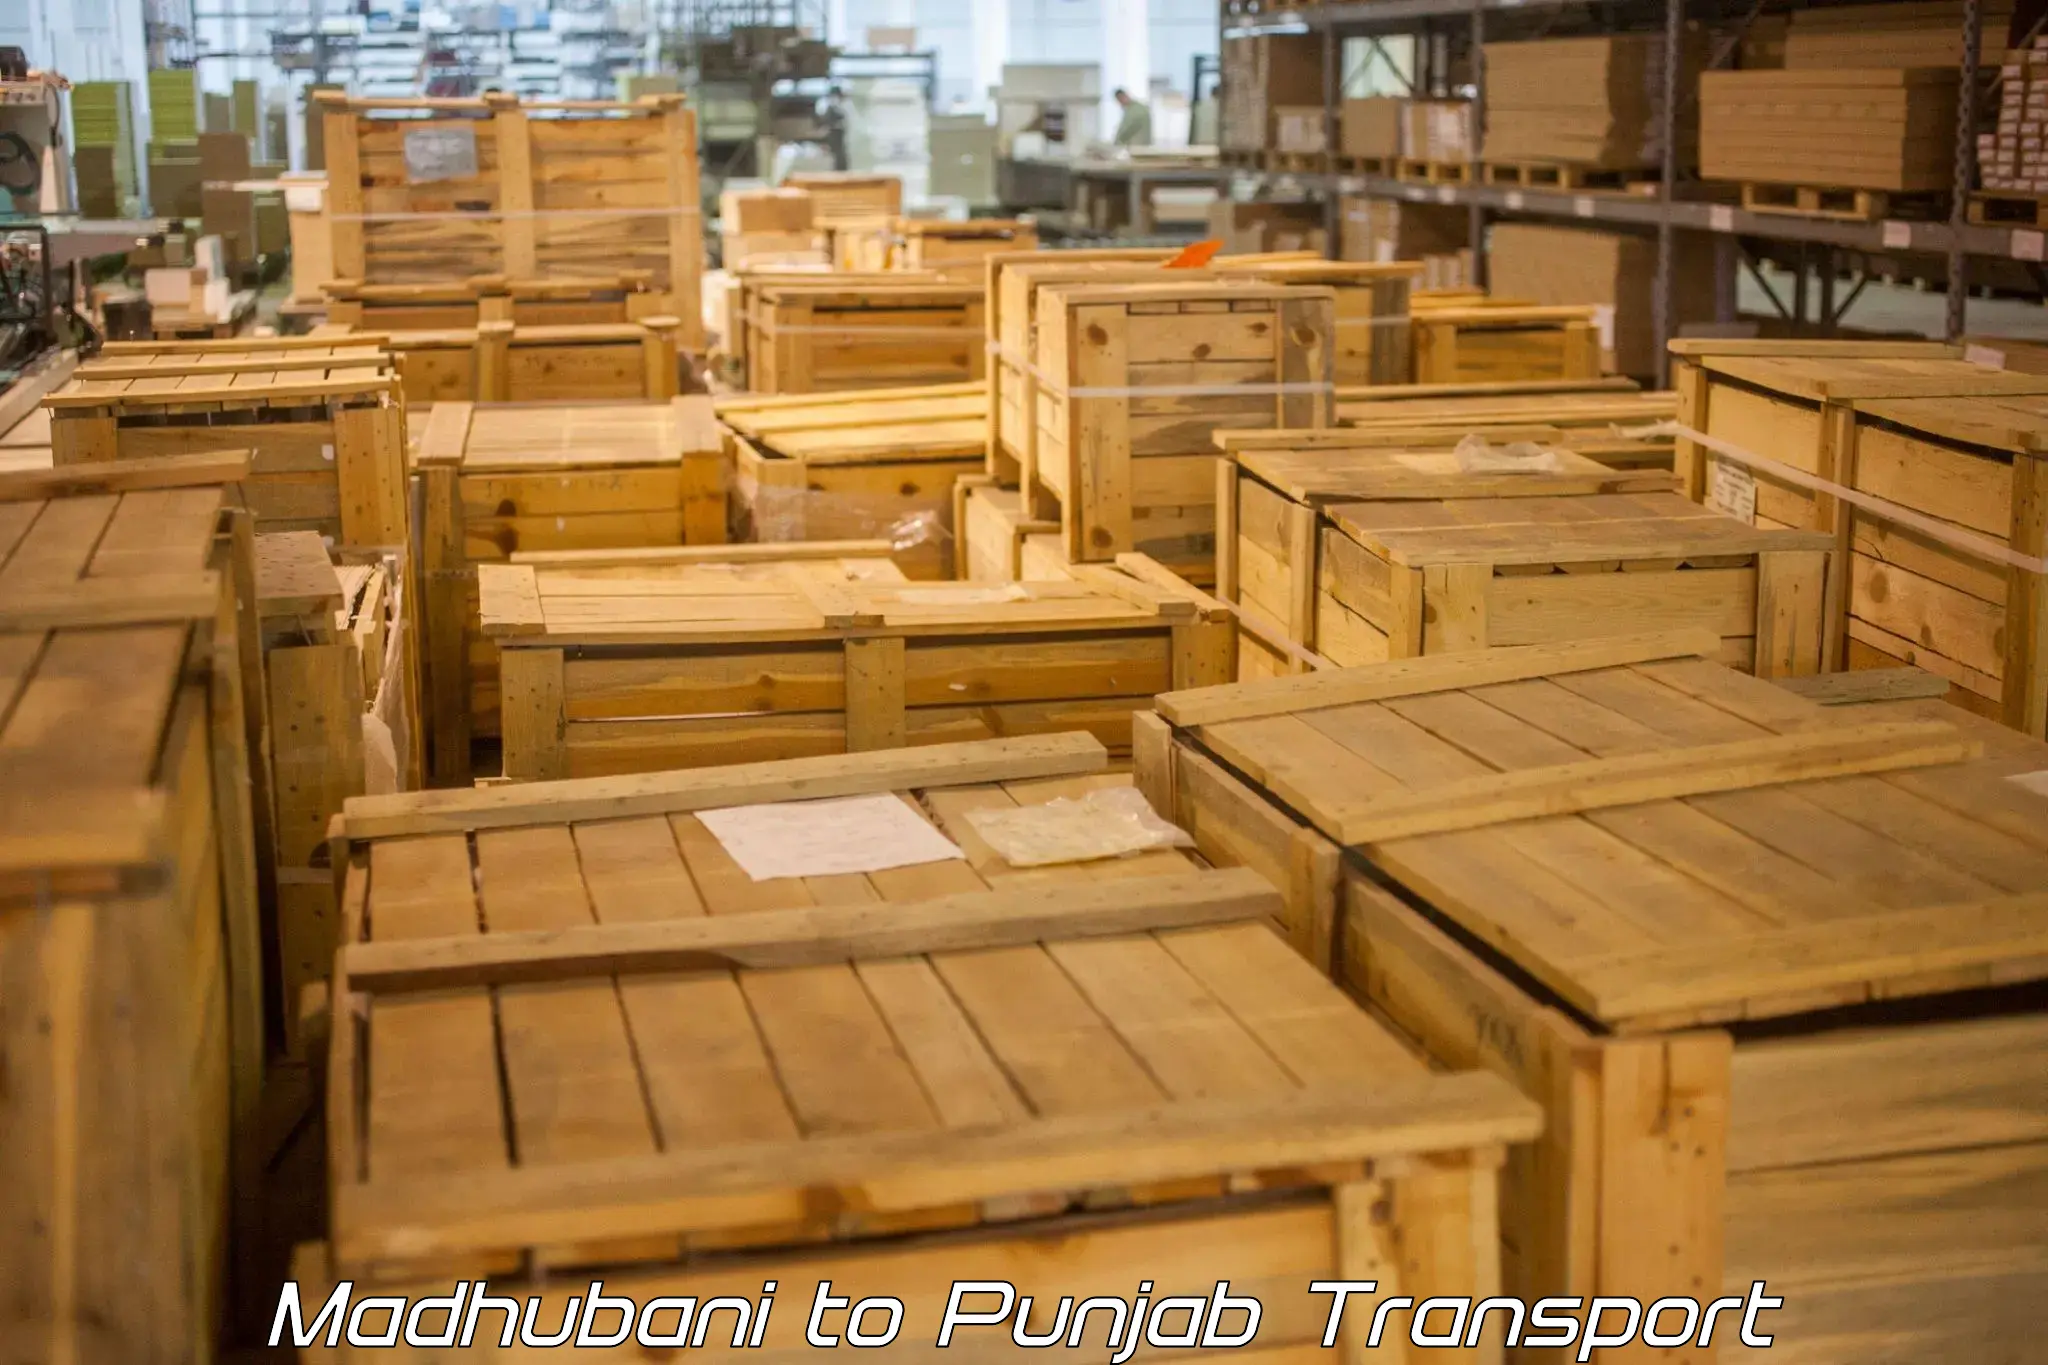 Part load transport service in India Madhubani to Mohali